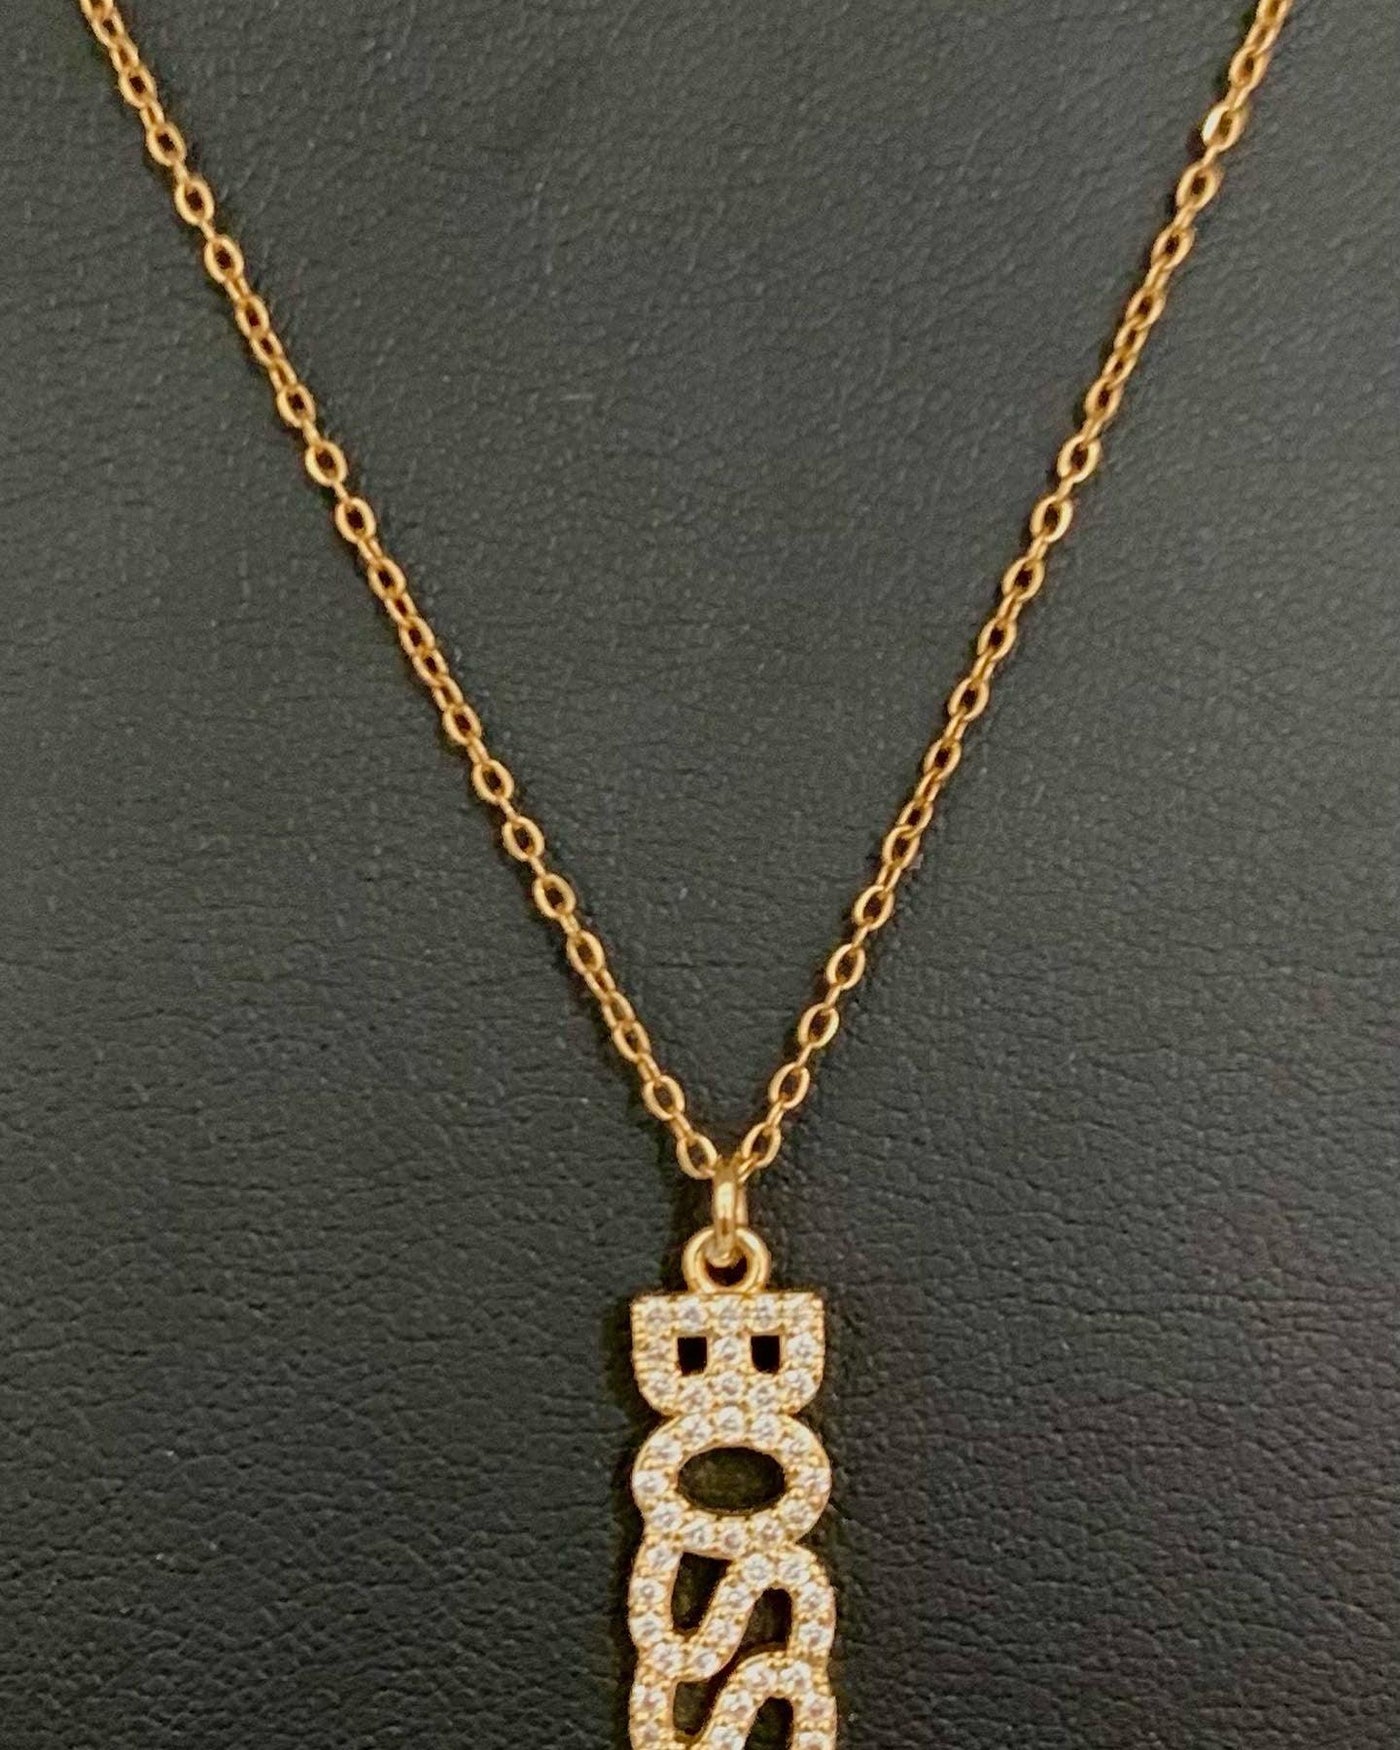 Gold Filled Women’s Charm Necklace - Brent's Bling